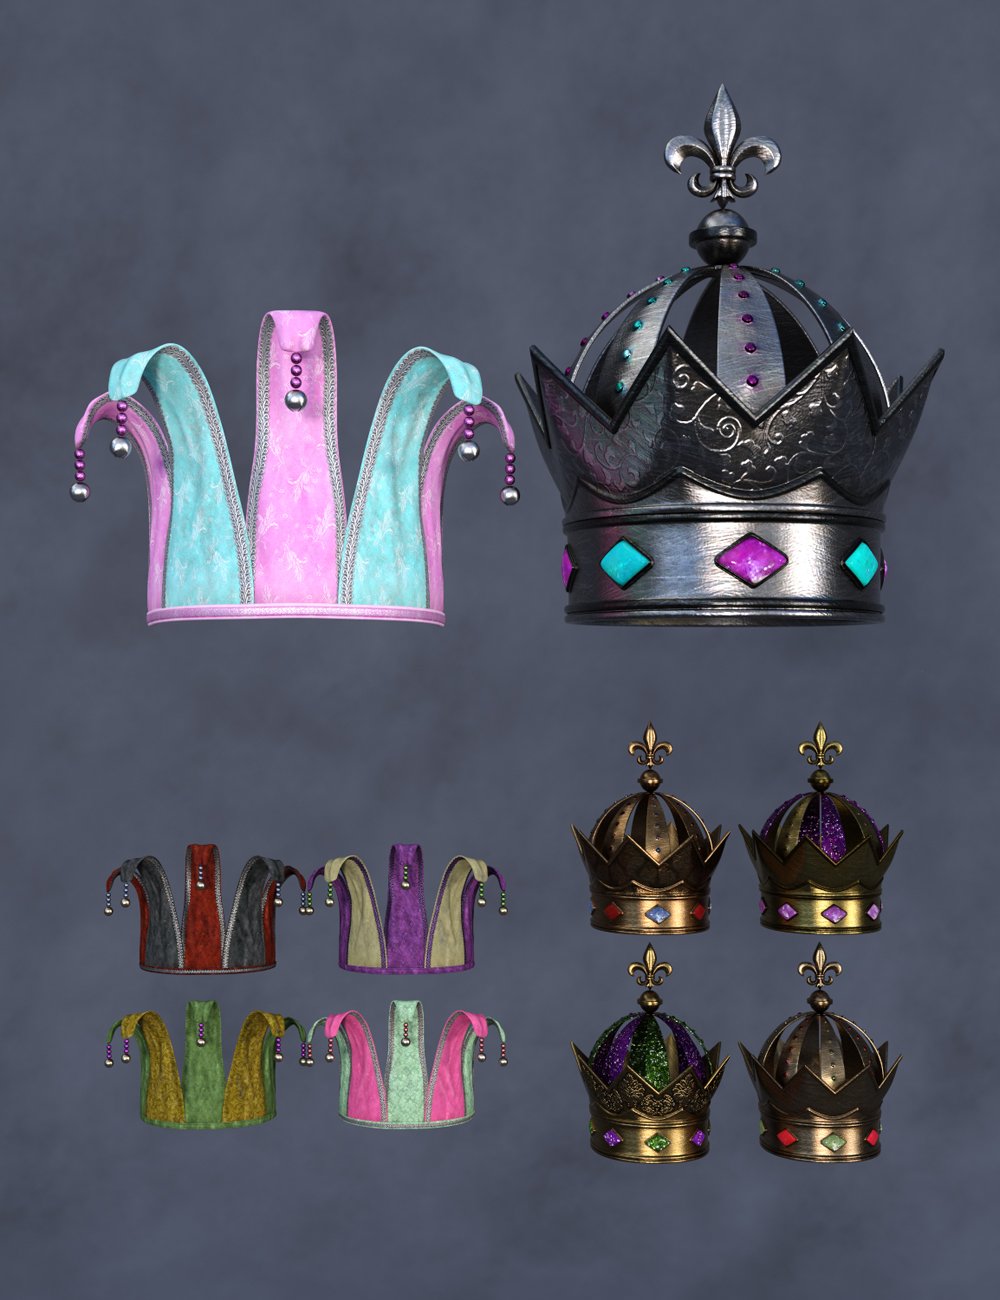 Fun Mardi Gras Mix and Match Crowns for Genesis 8 and 8.1 by: Barbara BrundonUmblefuglyArien, 3D Models by Daz 3D